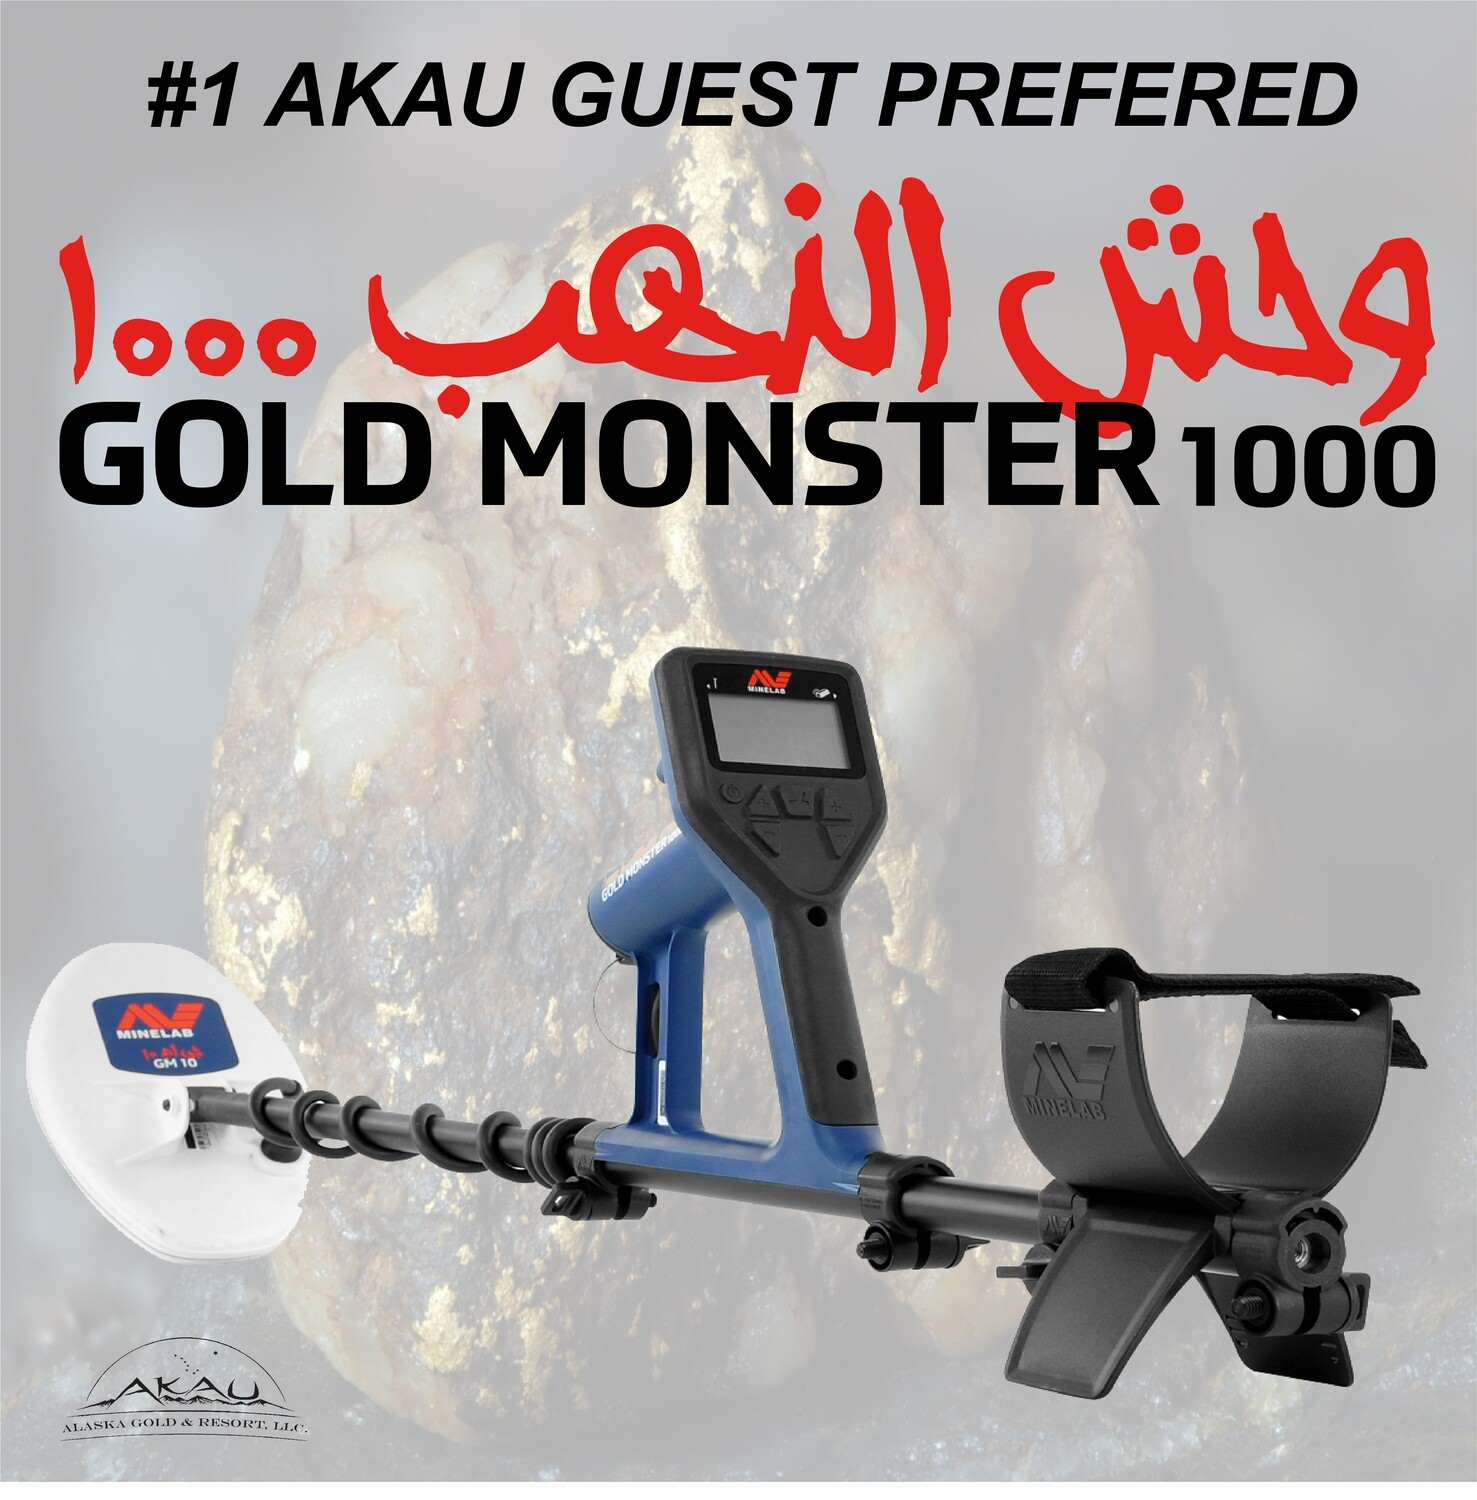 Gold Monster 1000 - includes two coils - #1 AKAU GUEST PREFERRED!